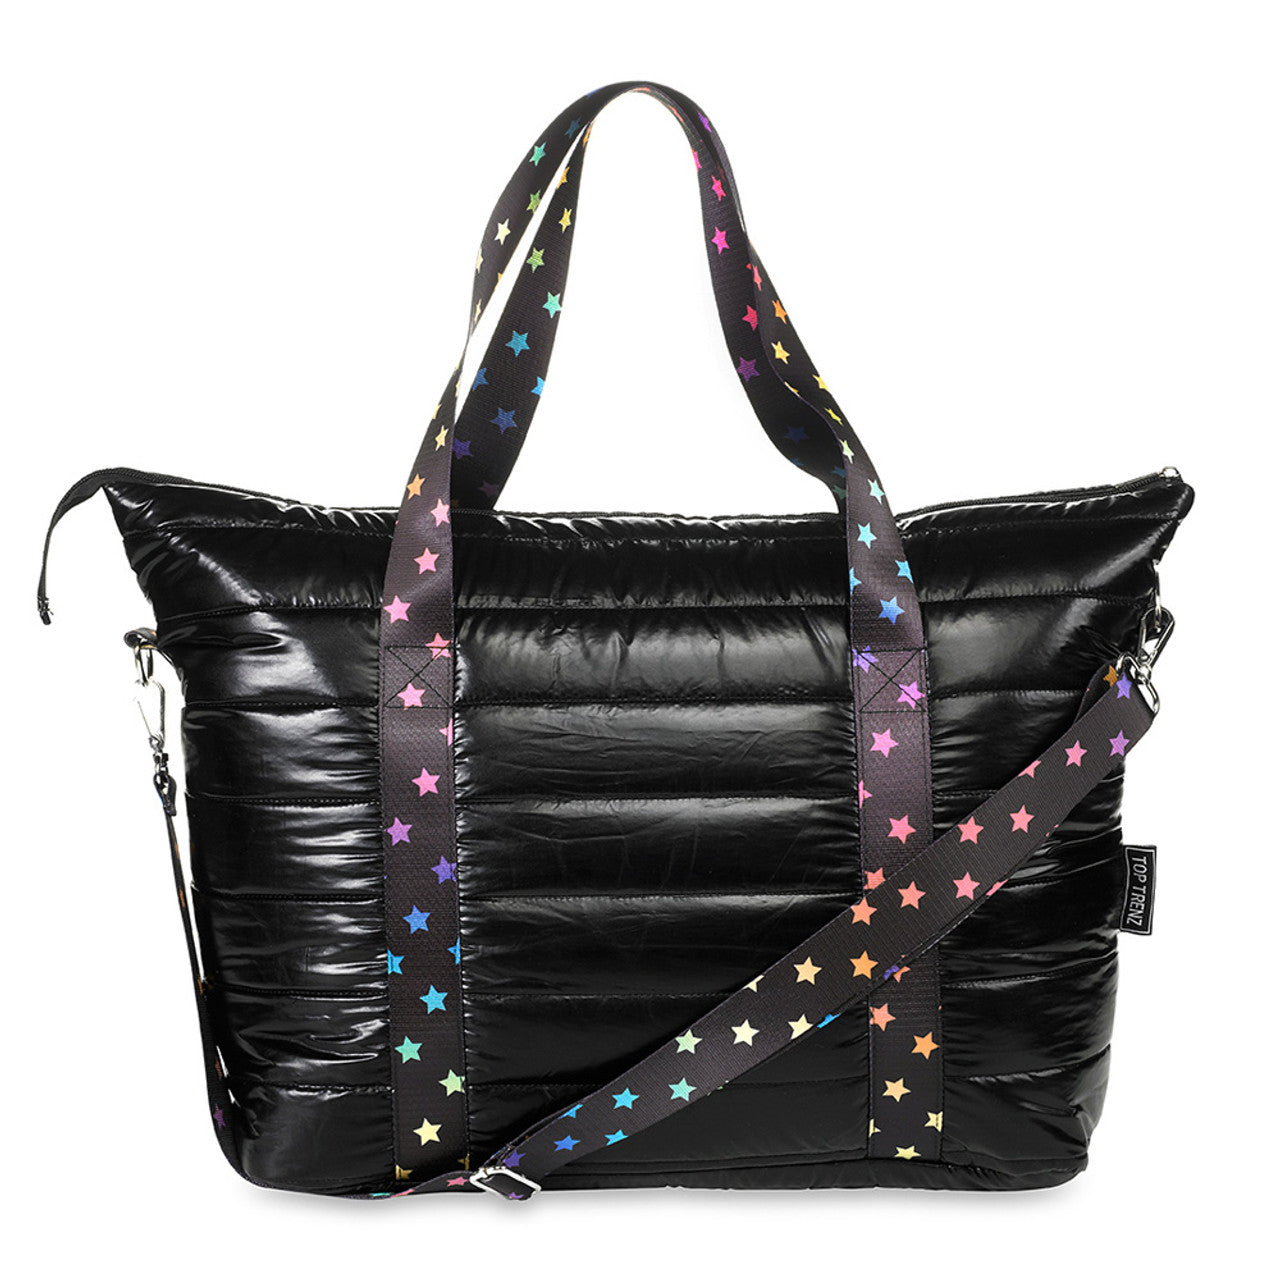 Black Puffer Tote with Scatter Star Strap